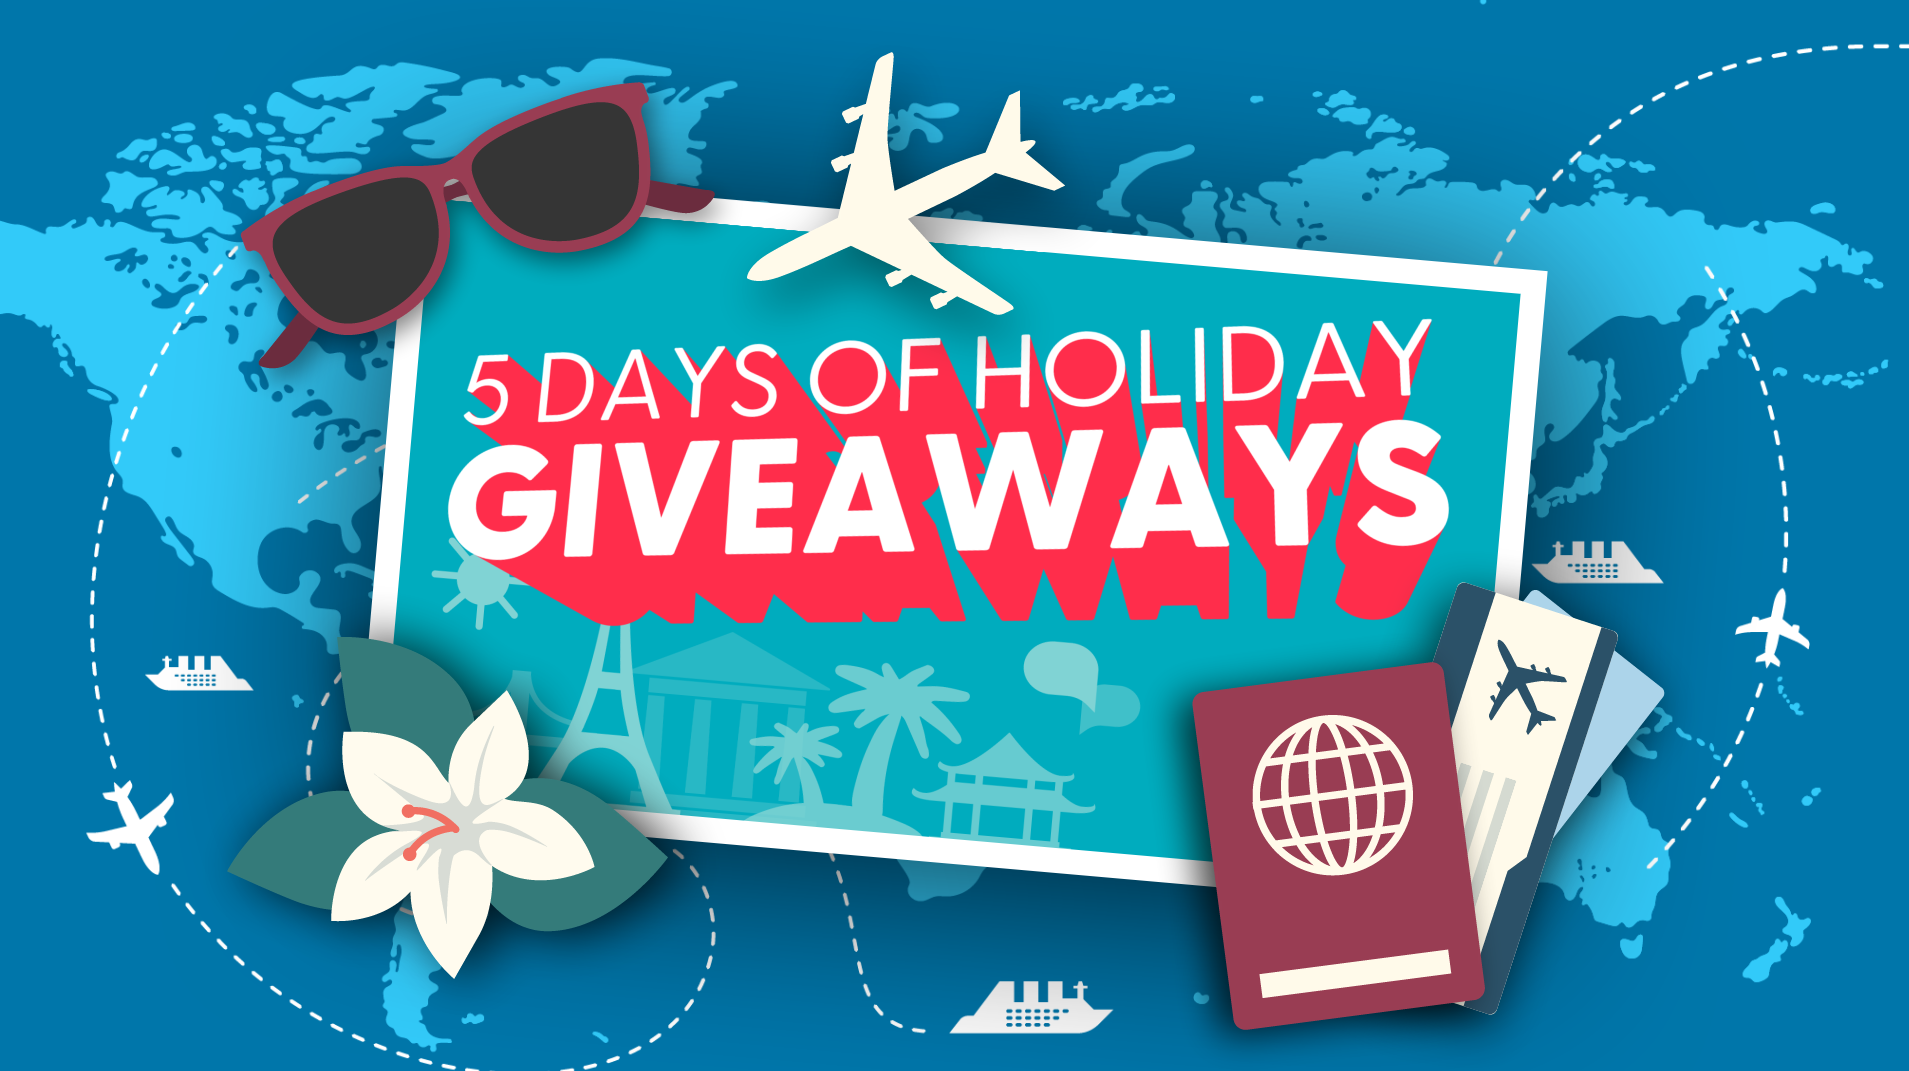 Meet our latest 'five days of holiday giveaways' winner